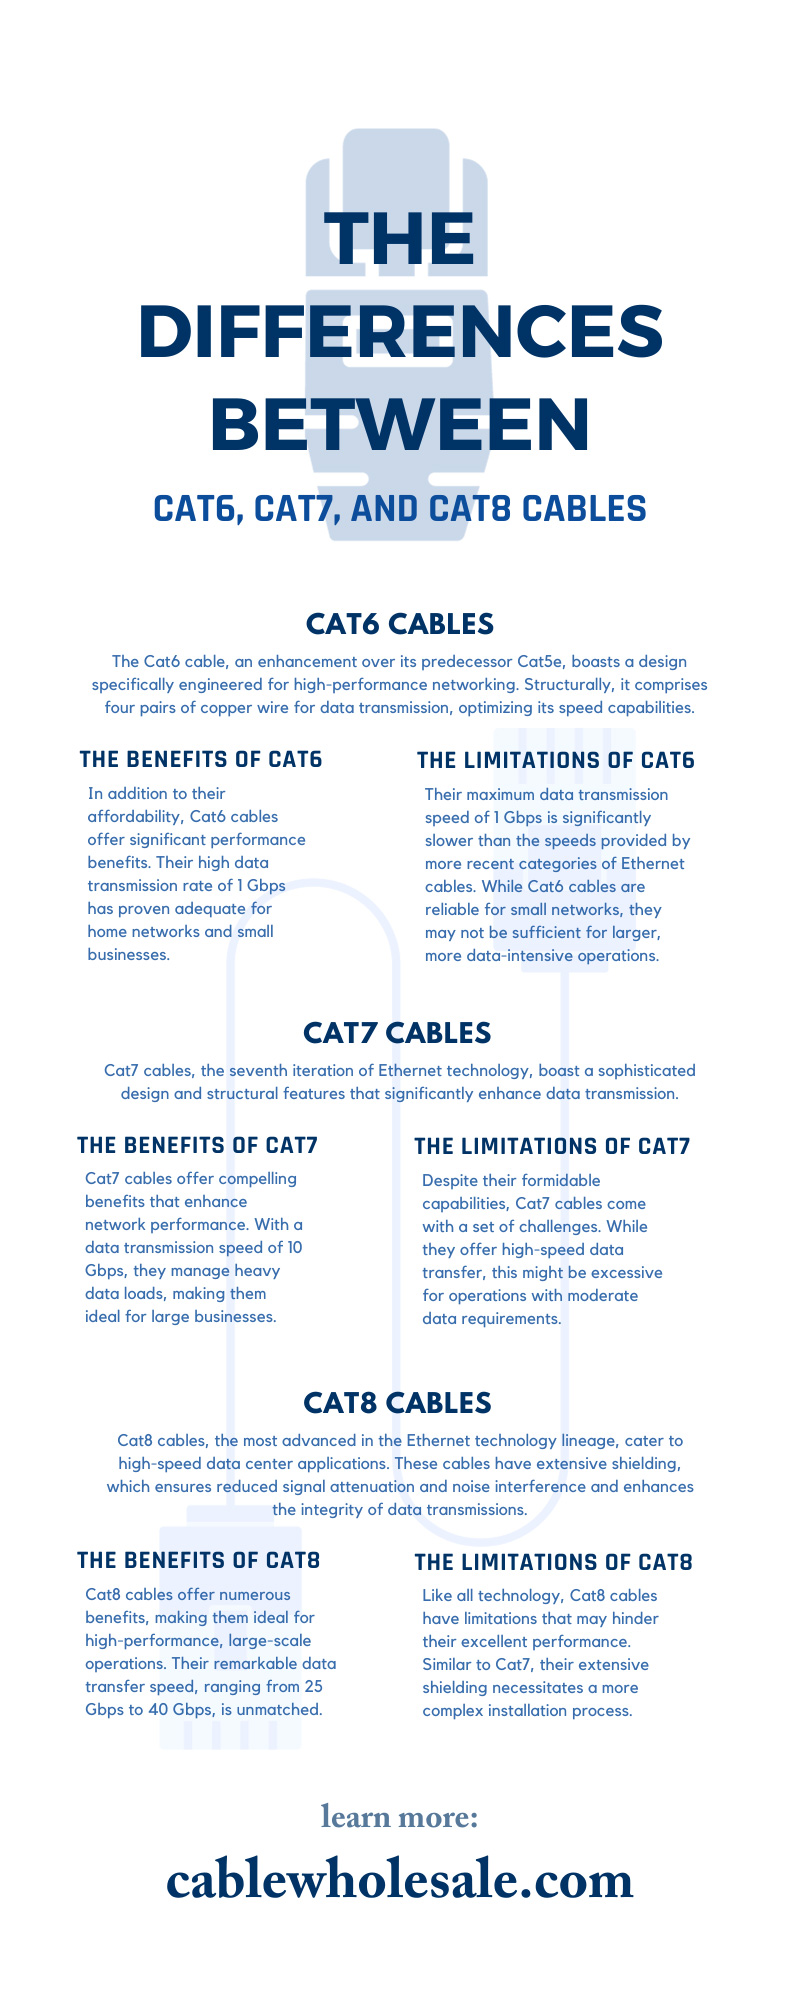 The Differences Between Cat6, Cat7, and Cat8 Cables
